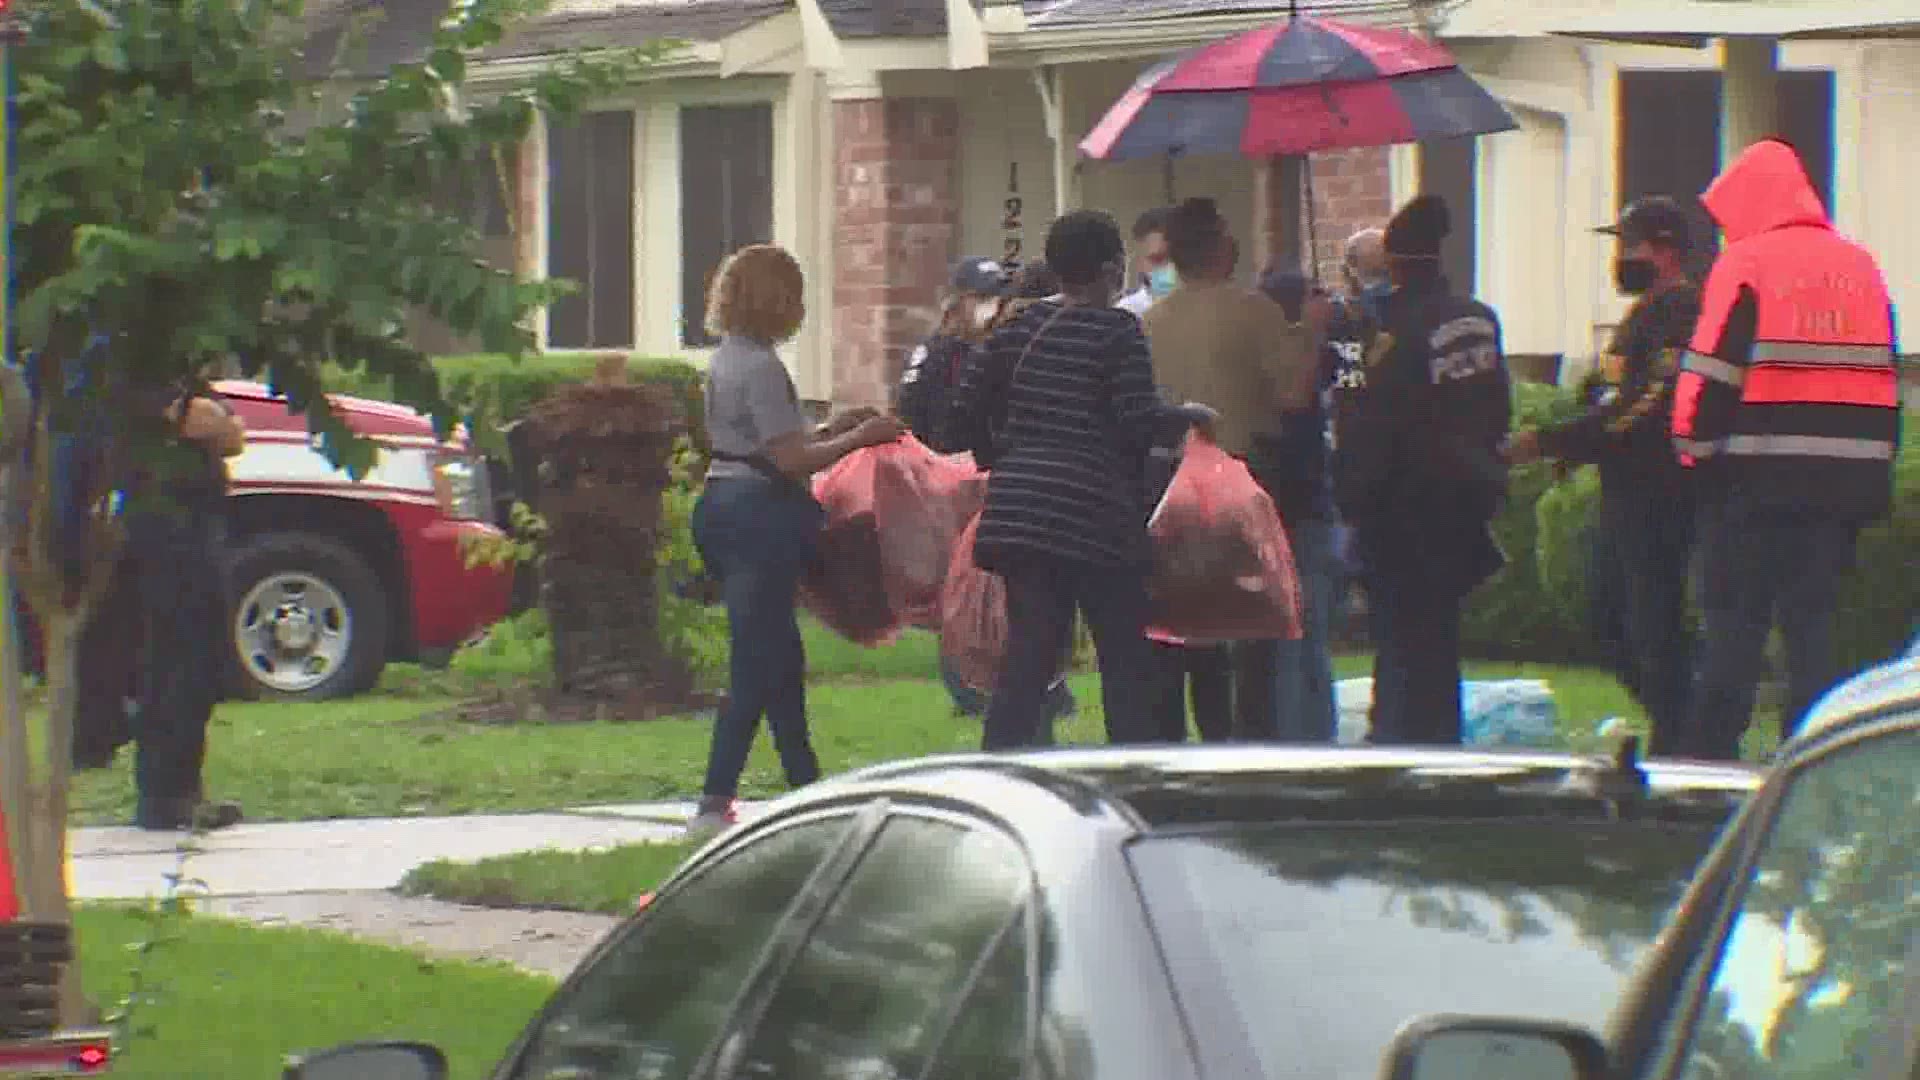 Houston police said dozens of people were found inside a home in Southwest Houston on Friday.